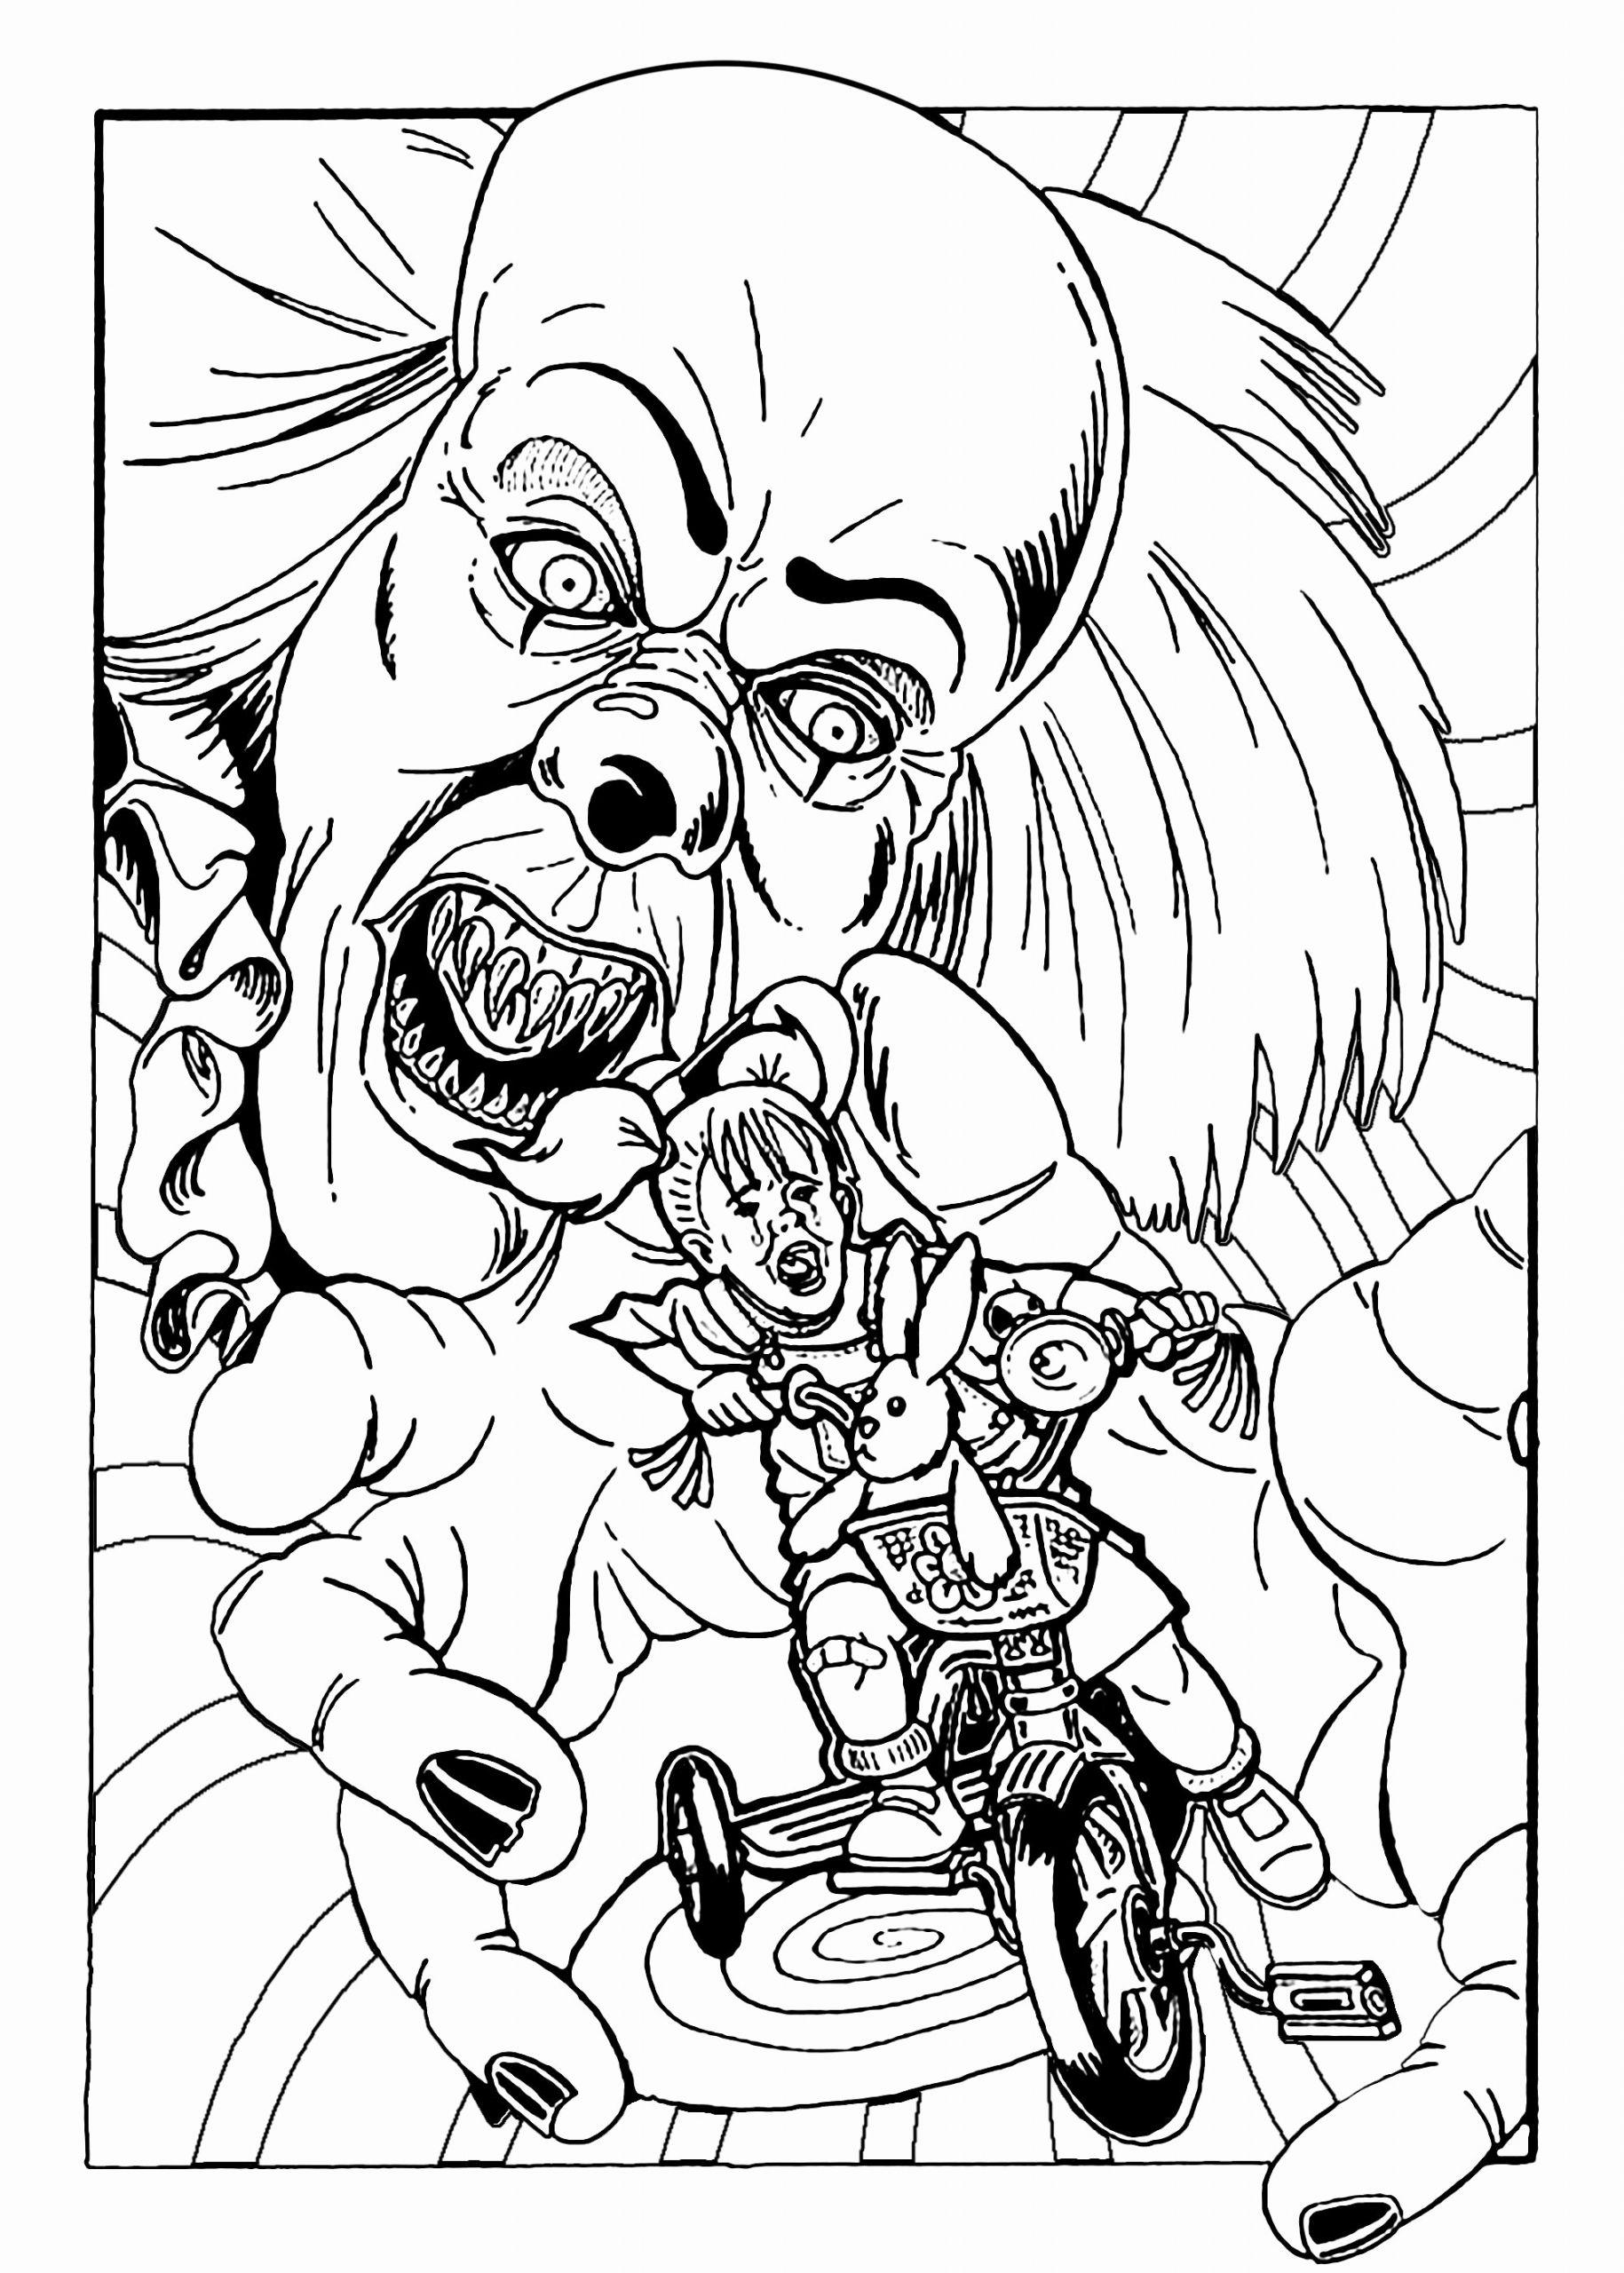 Horror Coloring Pages For Adults
 Pennywise Coloring Pages 2017 at GetColorings